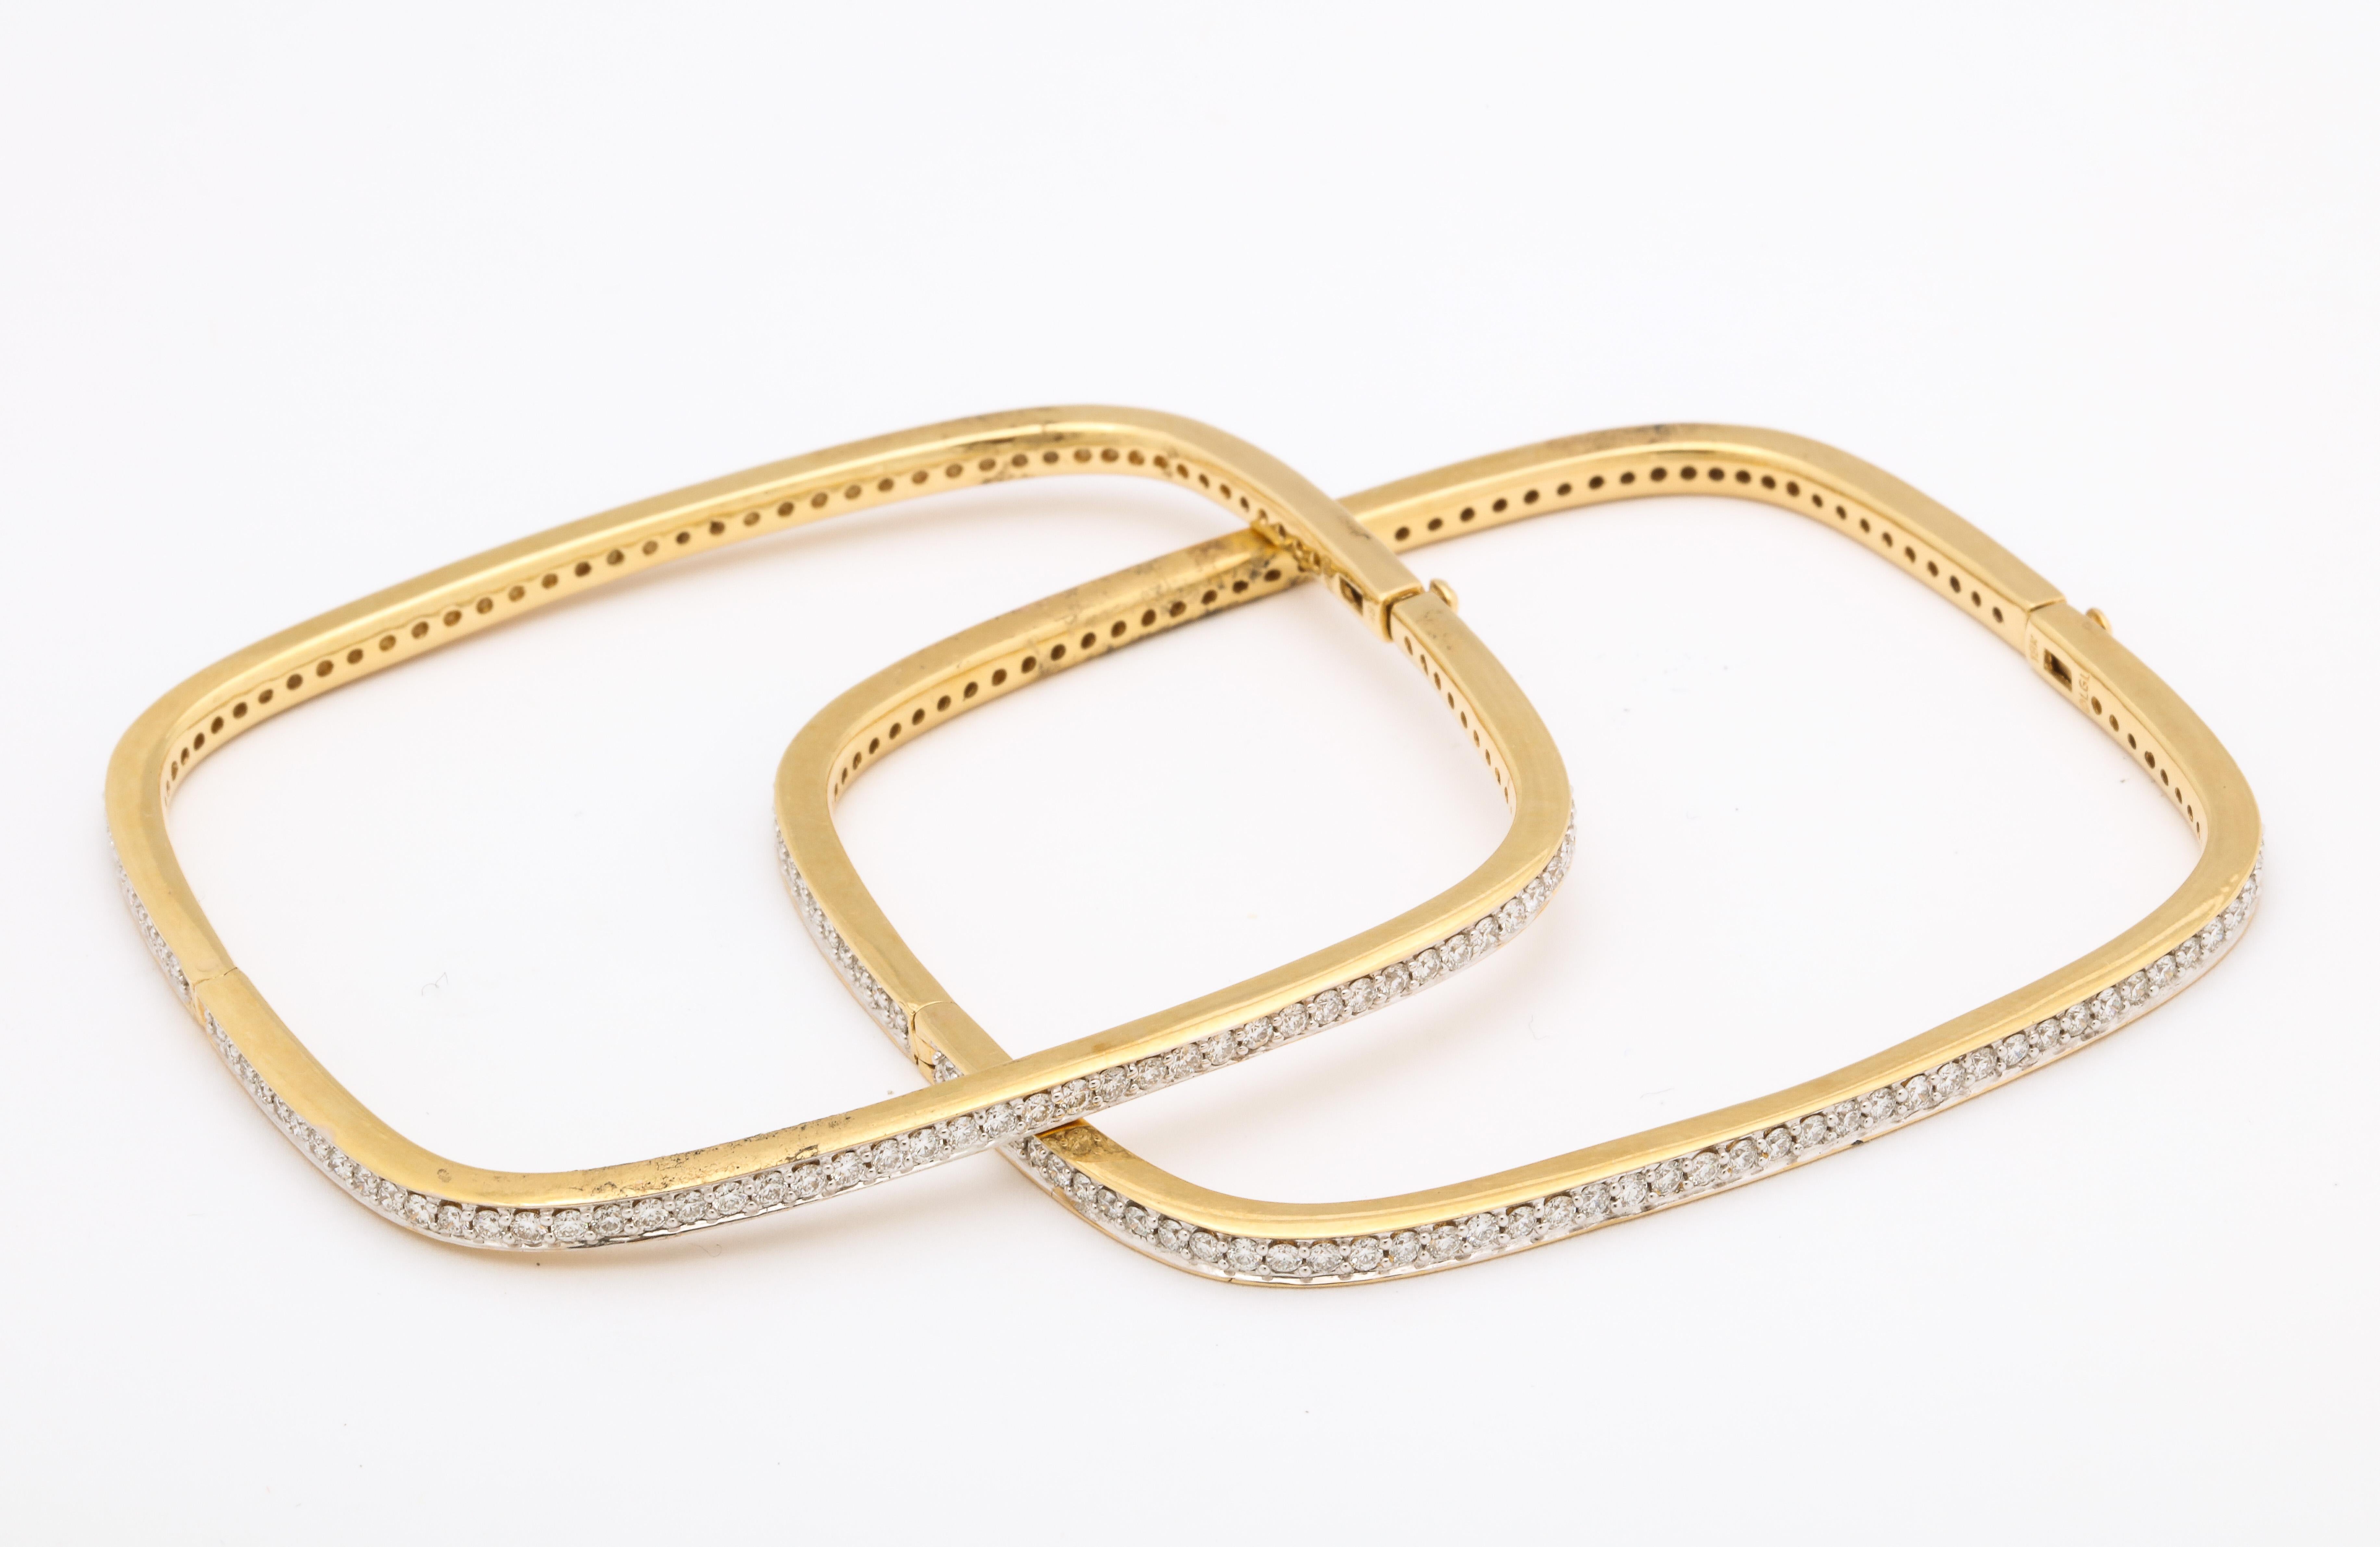 These diamond bangle bracelets are beautifully made with fine quality diamonds on all four sides.

There are approximately 4 1/2carats of fine diamonds VS 1 G set in 18K yellow gold. Because of the shape, they rest on the hand and don’t slide off.